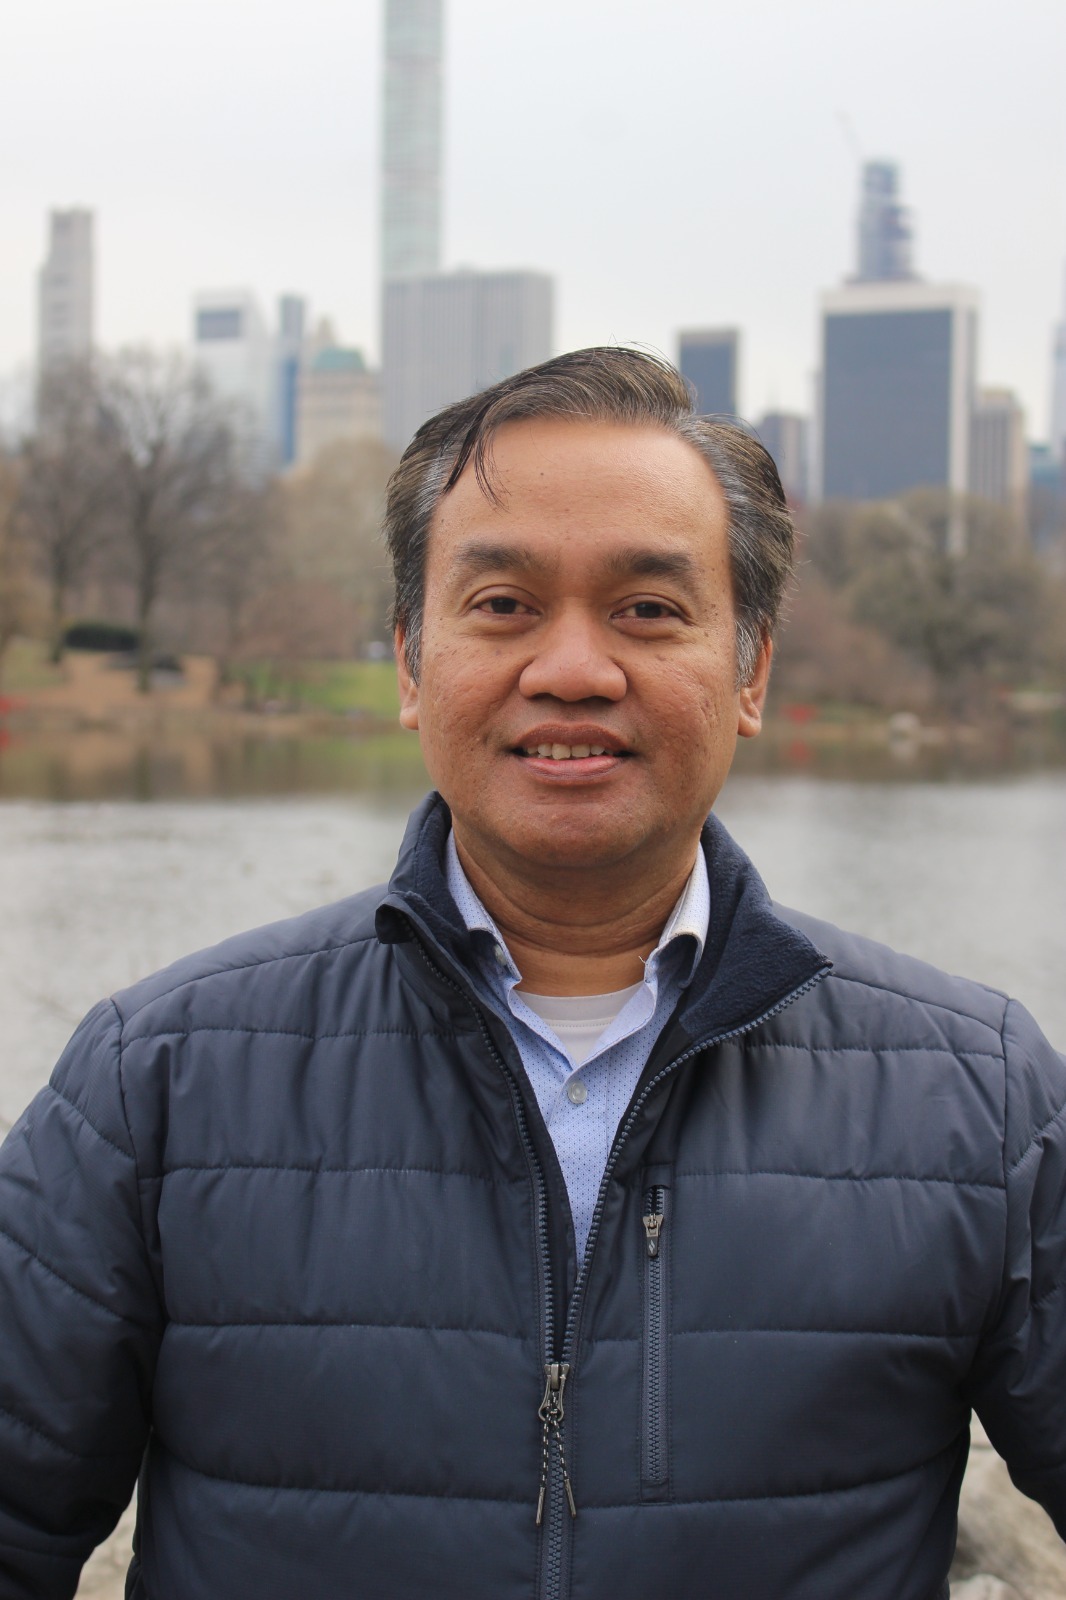 A photo of Nindyo Sasongko, a doctoral student in the systematic theology track in the Theology Department at Fordham University